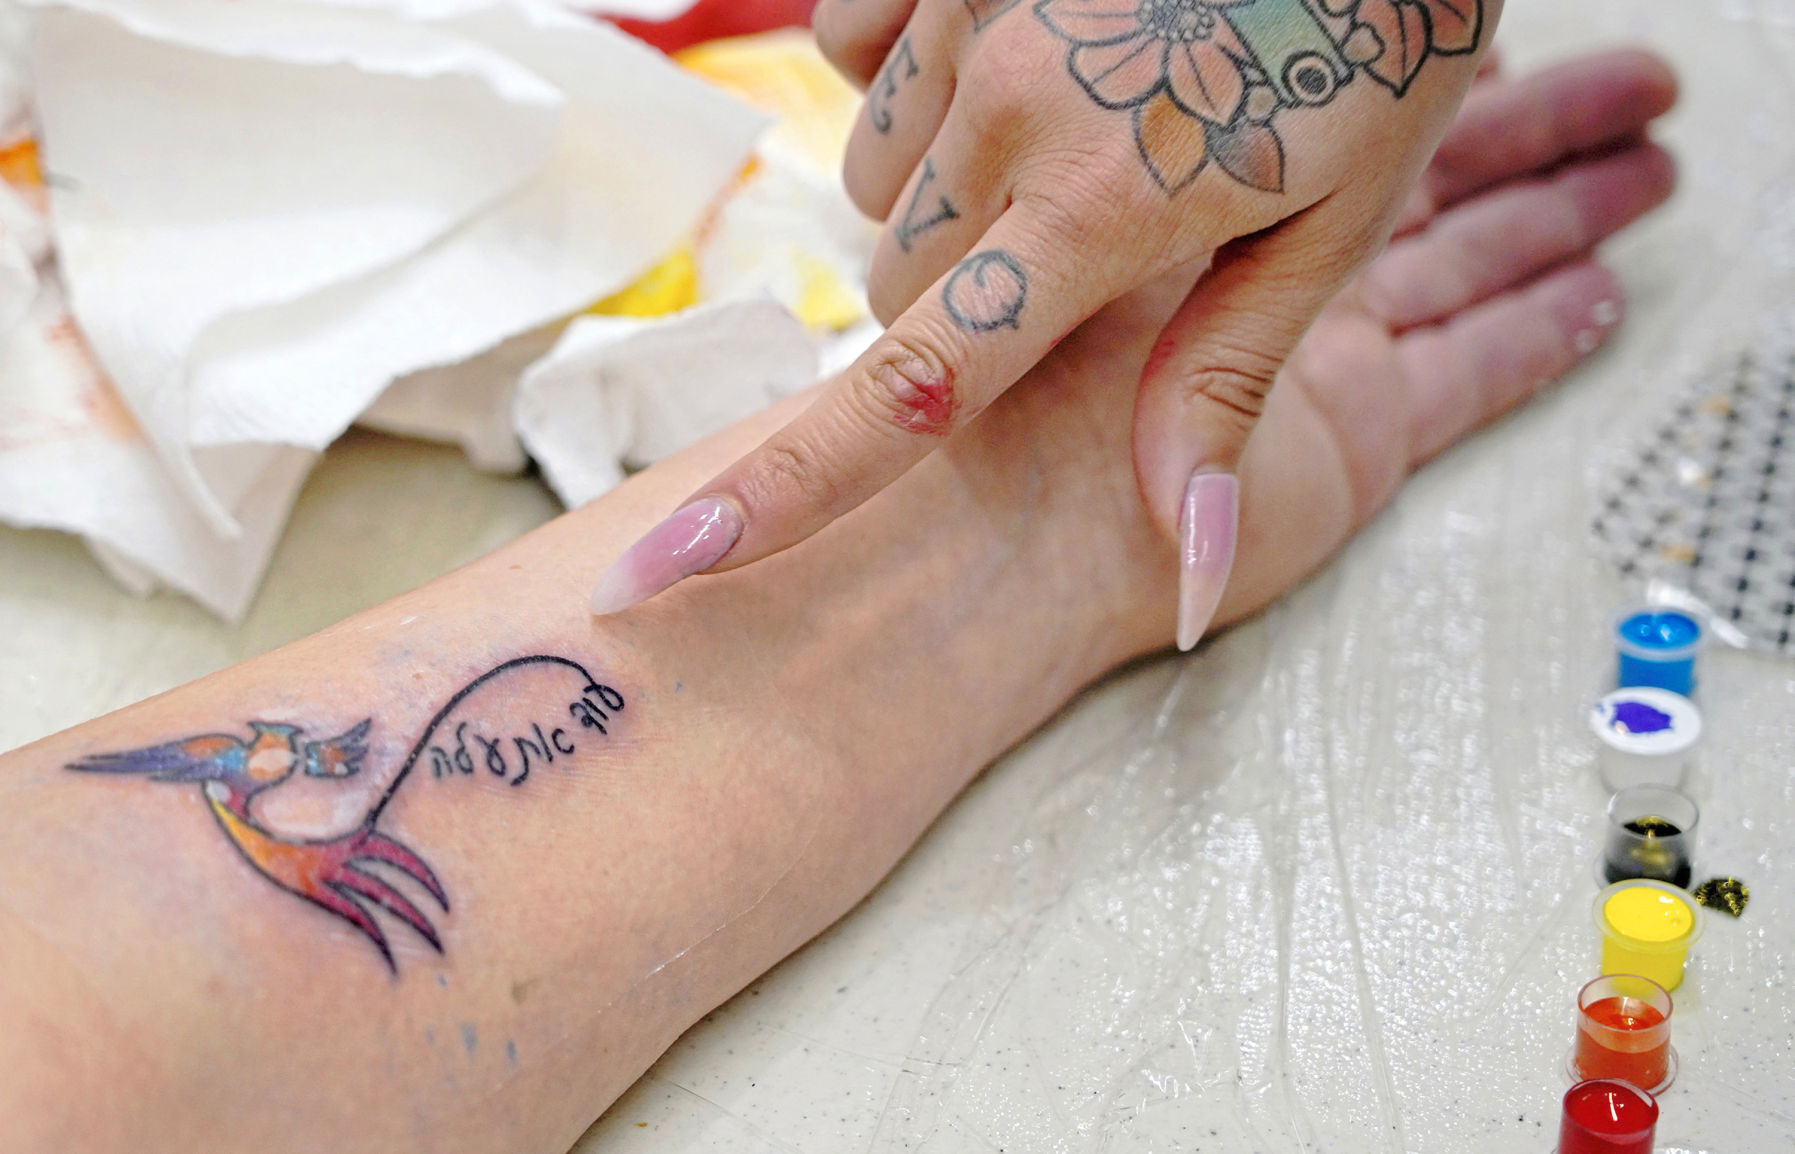 Lady Gaga's Powerful Survivor Tattoo: The Meaning Behind It